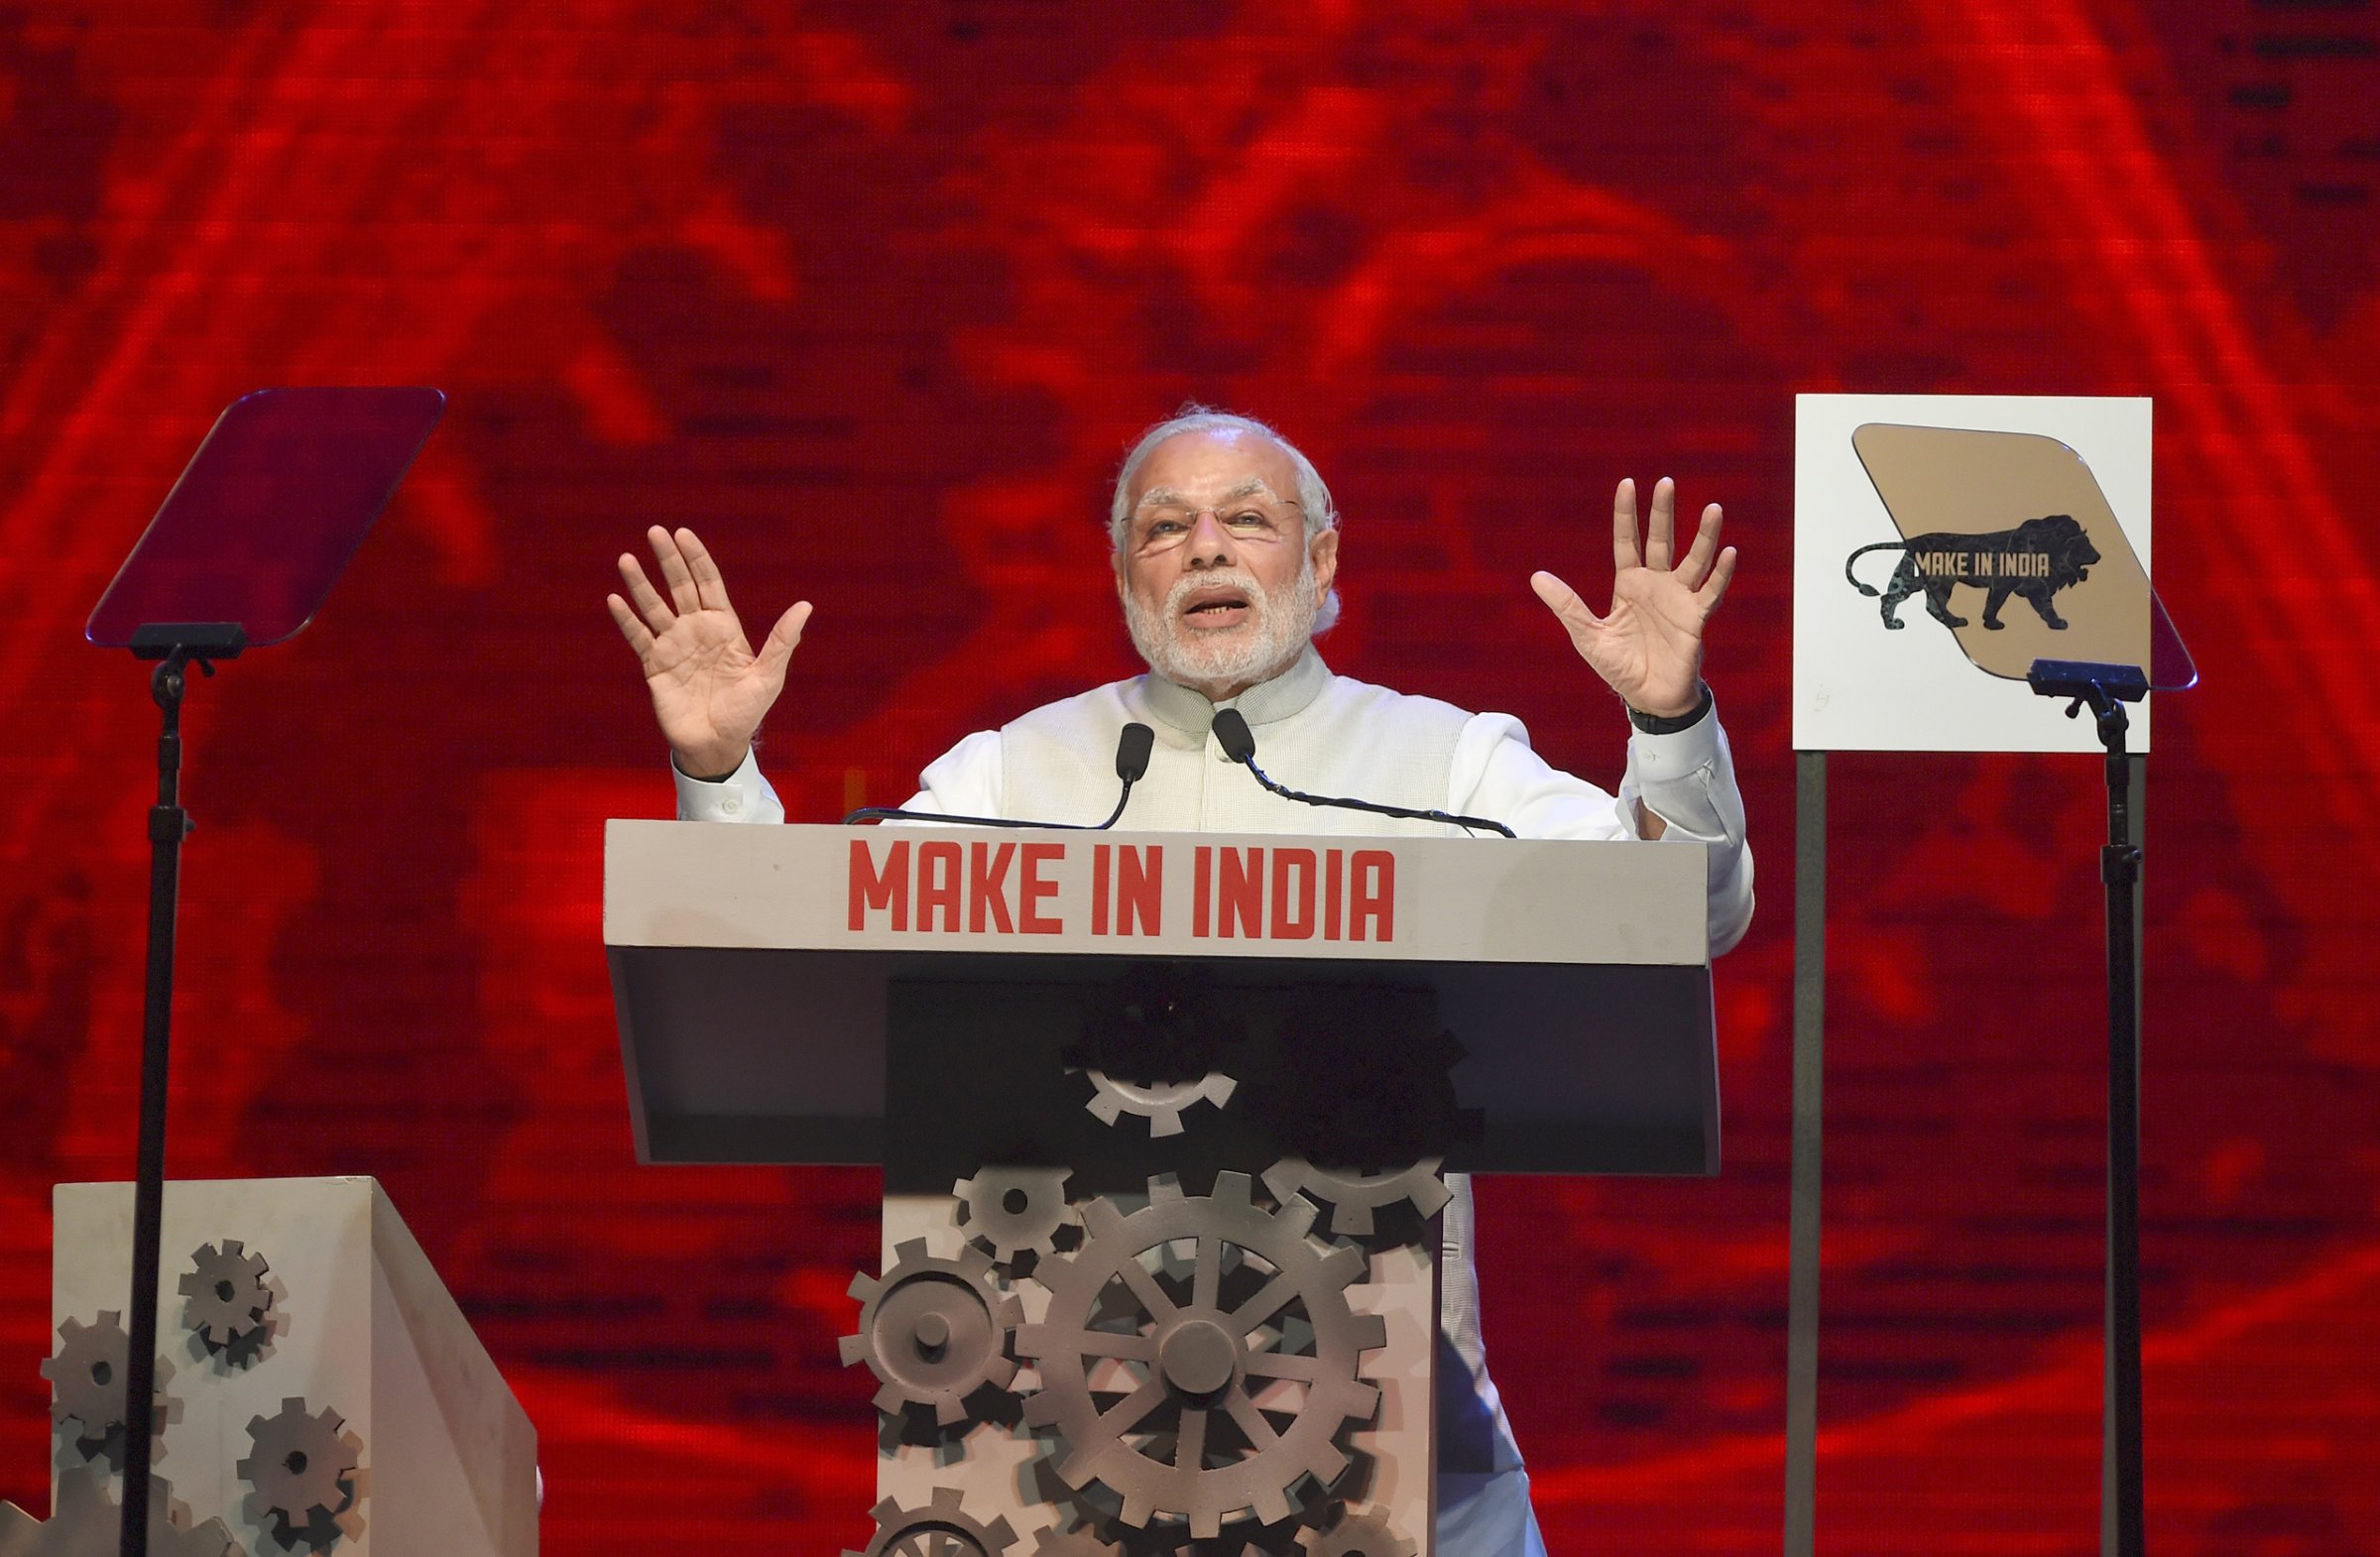 Modi speaks at the opening ceremony for Make In India Week in Mumbai on Feb. 13